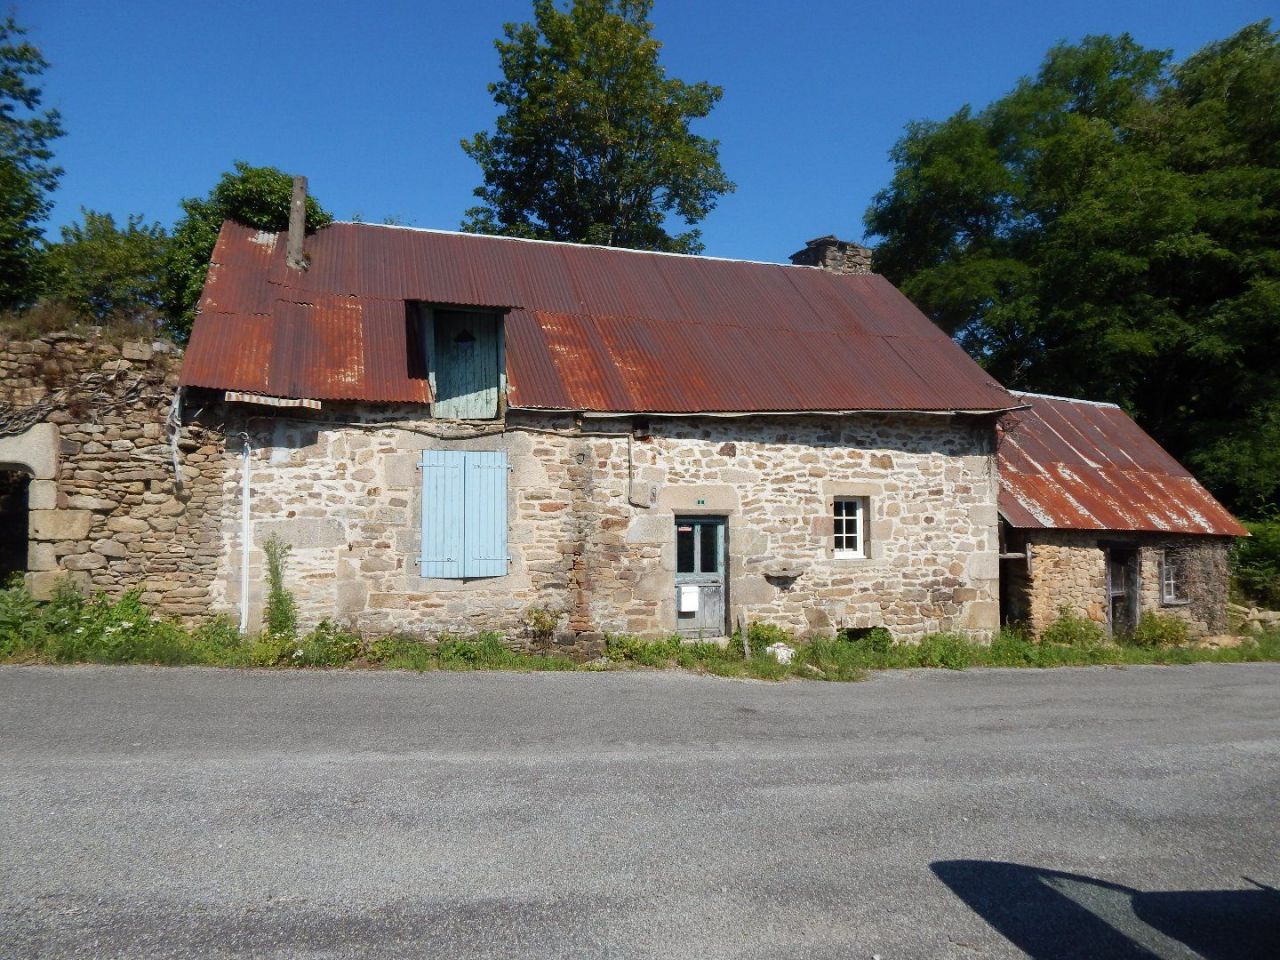 House in Limousin, France - picture 1